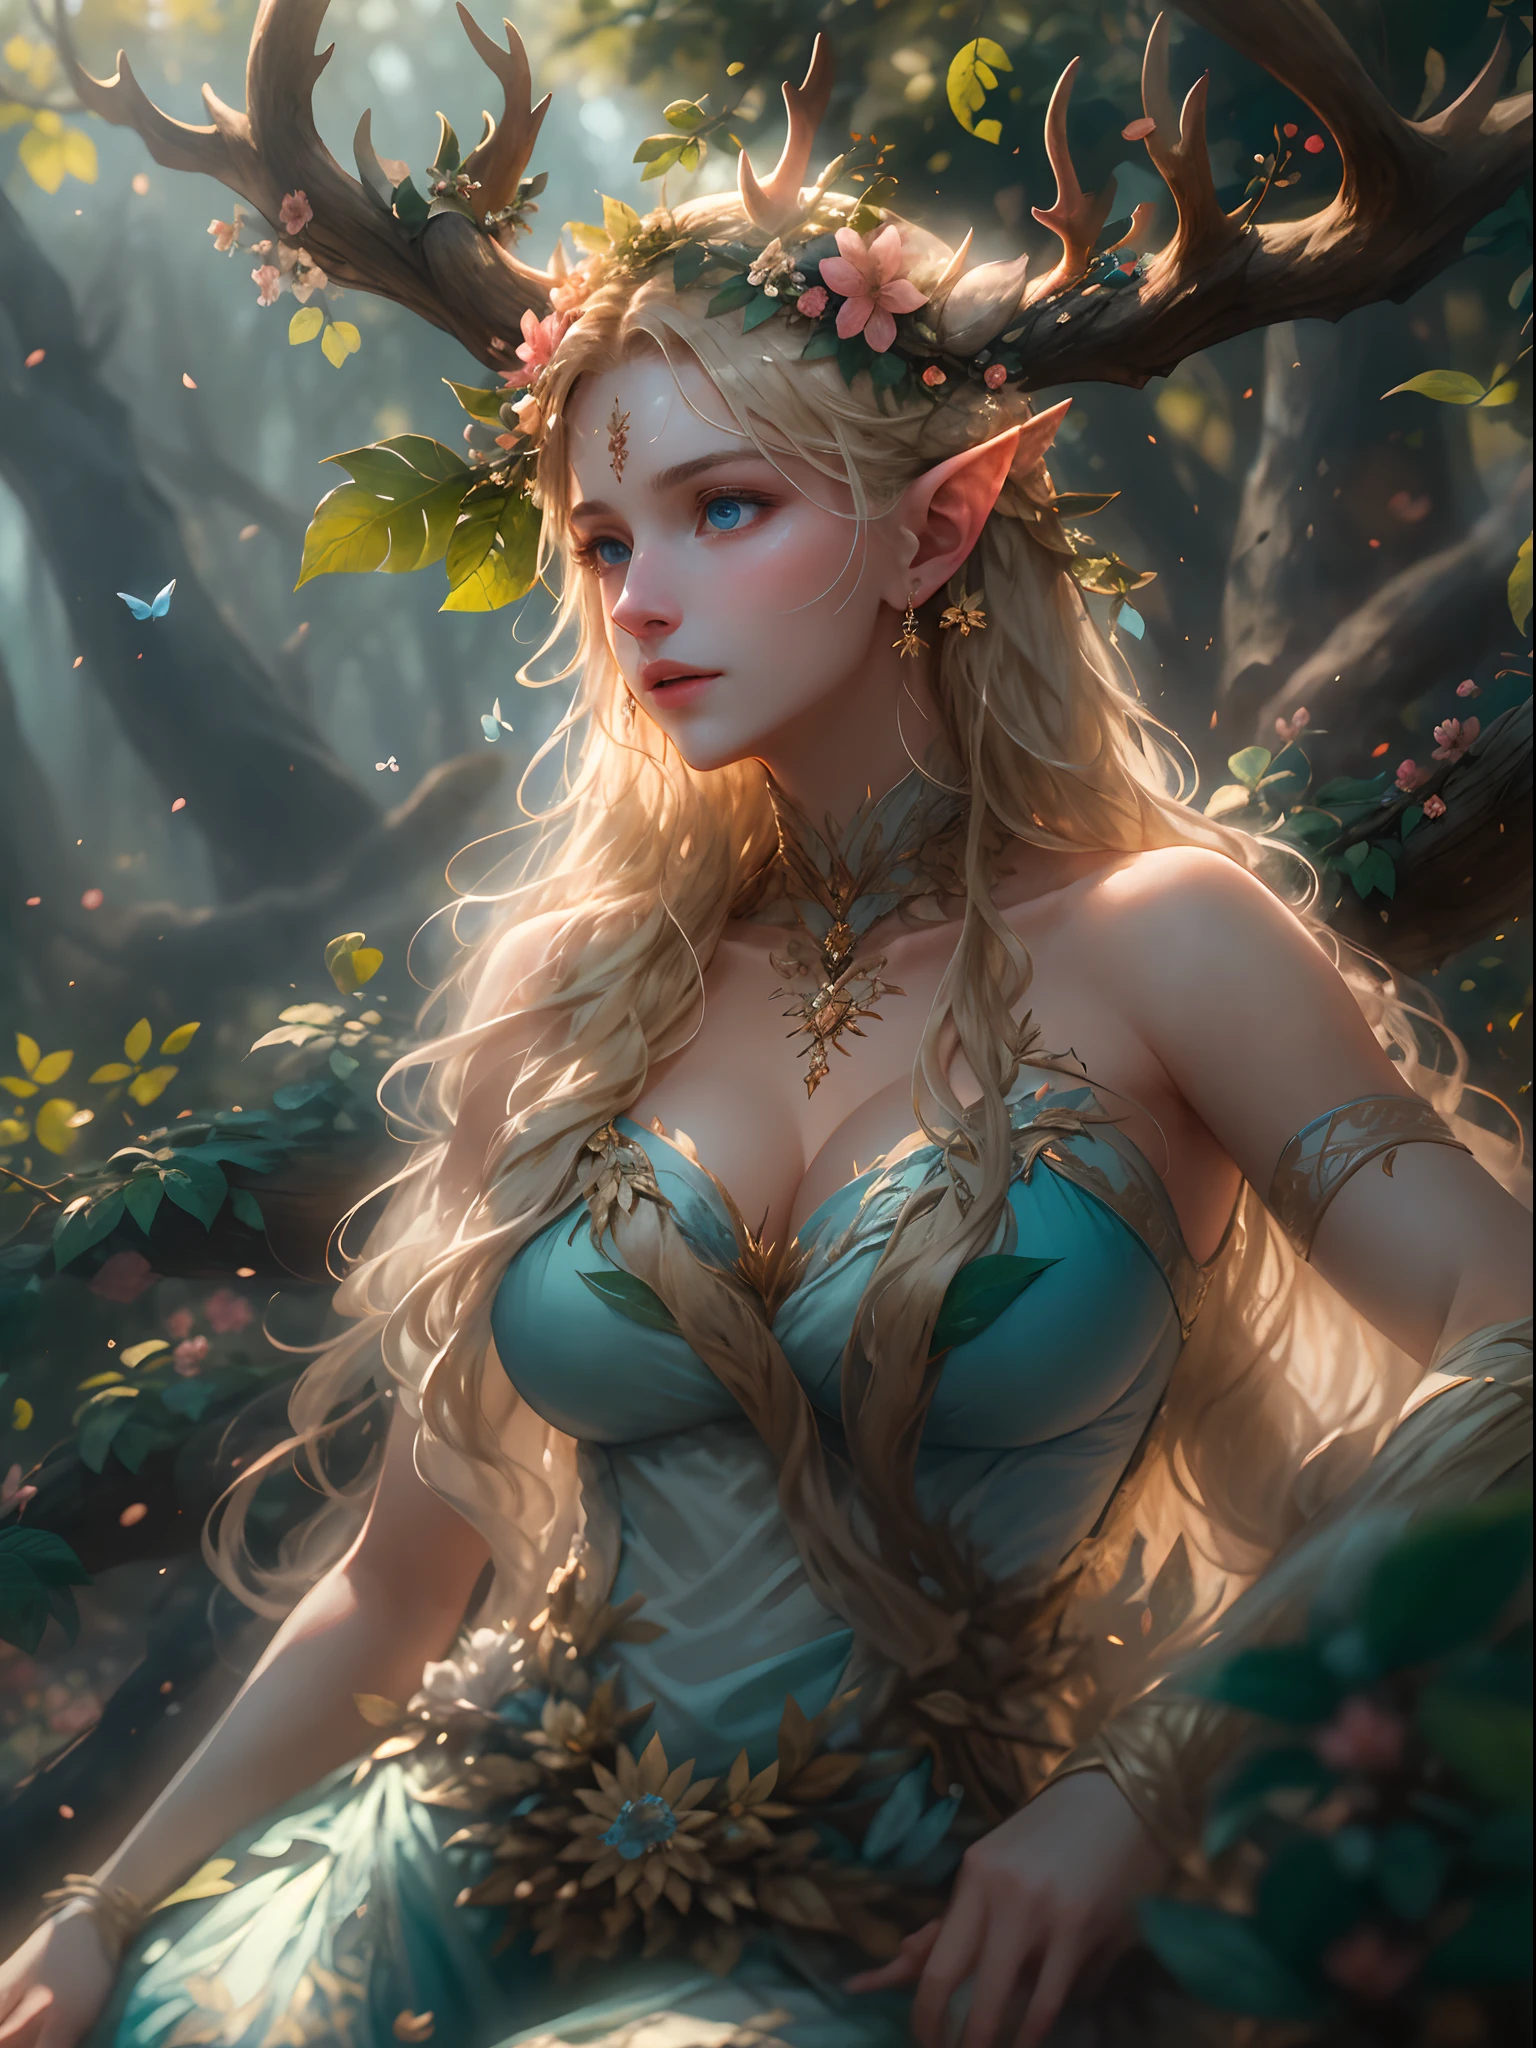 （realisticlying：1.35），（concept-art），（cowboy lenajestic goddess of the forest），（Gorgeous face，big breasts enchanting，Amazing），（Long, Flowing light blonde hair），A humanoid body composed entirely of flowers and leaves，（Beautiful skin is green，Made of complex leaves and vines），（Antlers on the head），（pointy ears），（Shining blue eyes），Lush big breasts（an enchanted forest）Background with，butterflys：0.35，leafs， blooming light effect， blossoms：0.4， God Ray， Light and dust， realistic skin textures， （The light from the back window is backlighted）， complex， A detailed， highest  quality， hasselblatt， Nikon D850， Natural stereo lighting， （Good anatomy）， well-composed， （good proportions）， subsurfacescattering， Award-Awarded， tmasterpiece